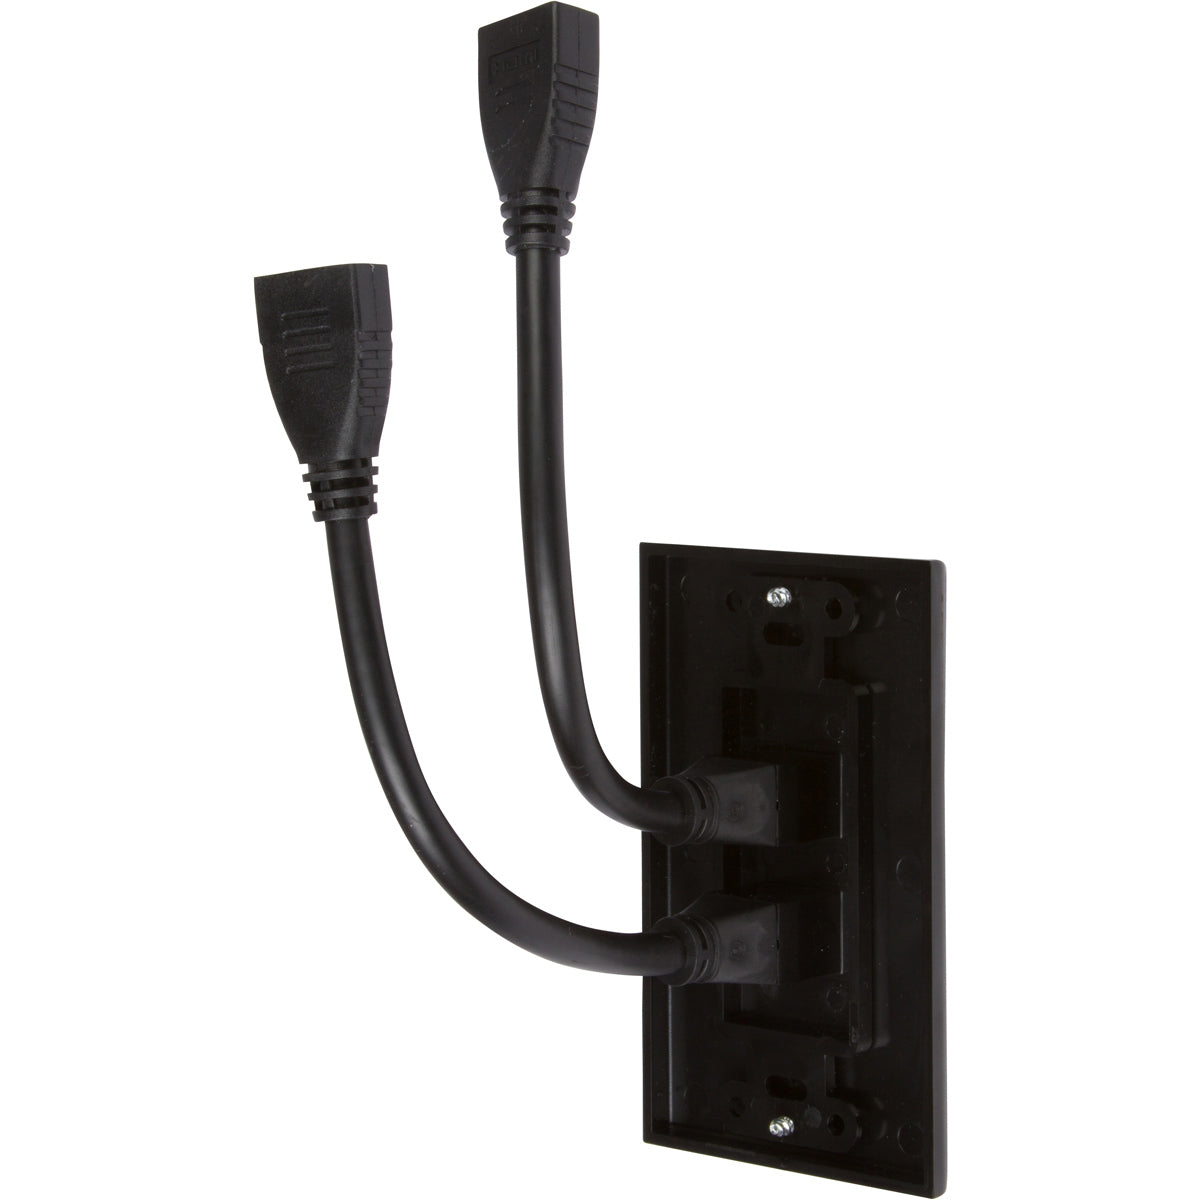 HDMI Wall Plate [UL Listed] (2 Port) Insert with 6-Inch Built-In Flexible Hi-Speed HDMI Cable (Black) - Milena International Inc